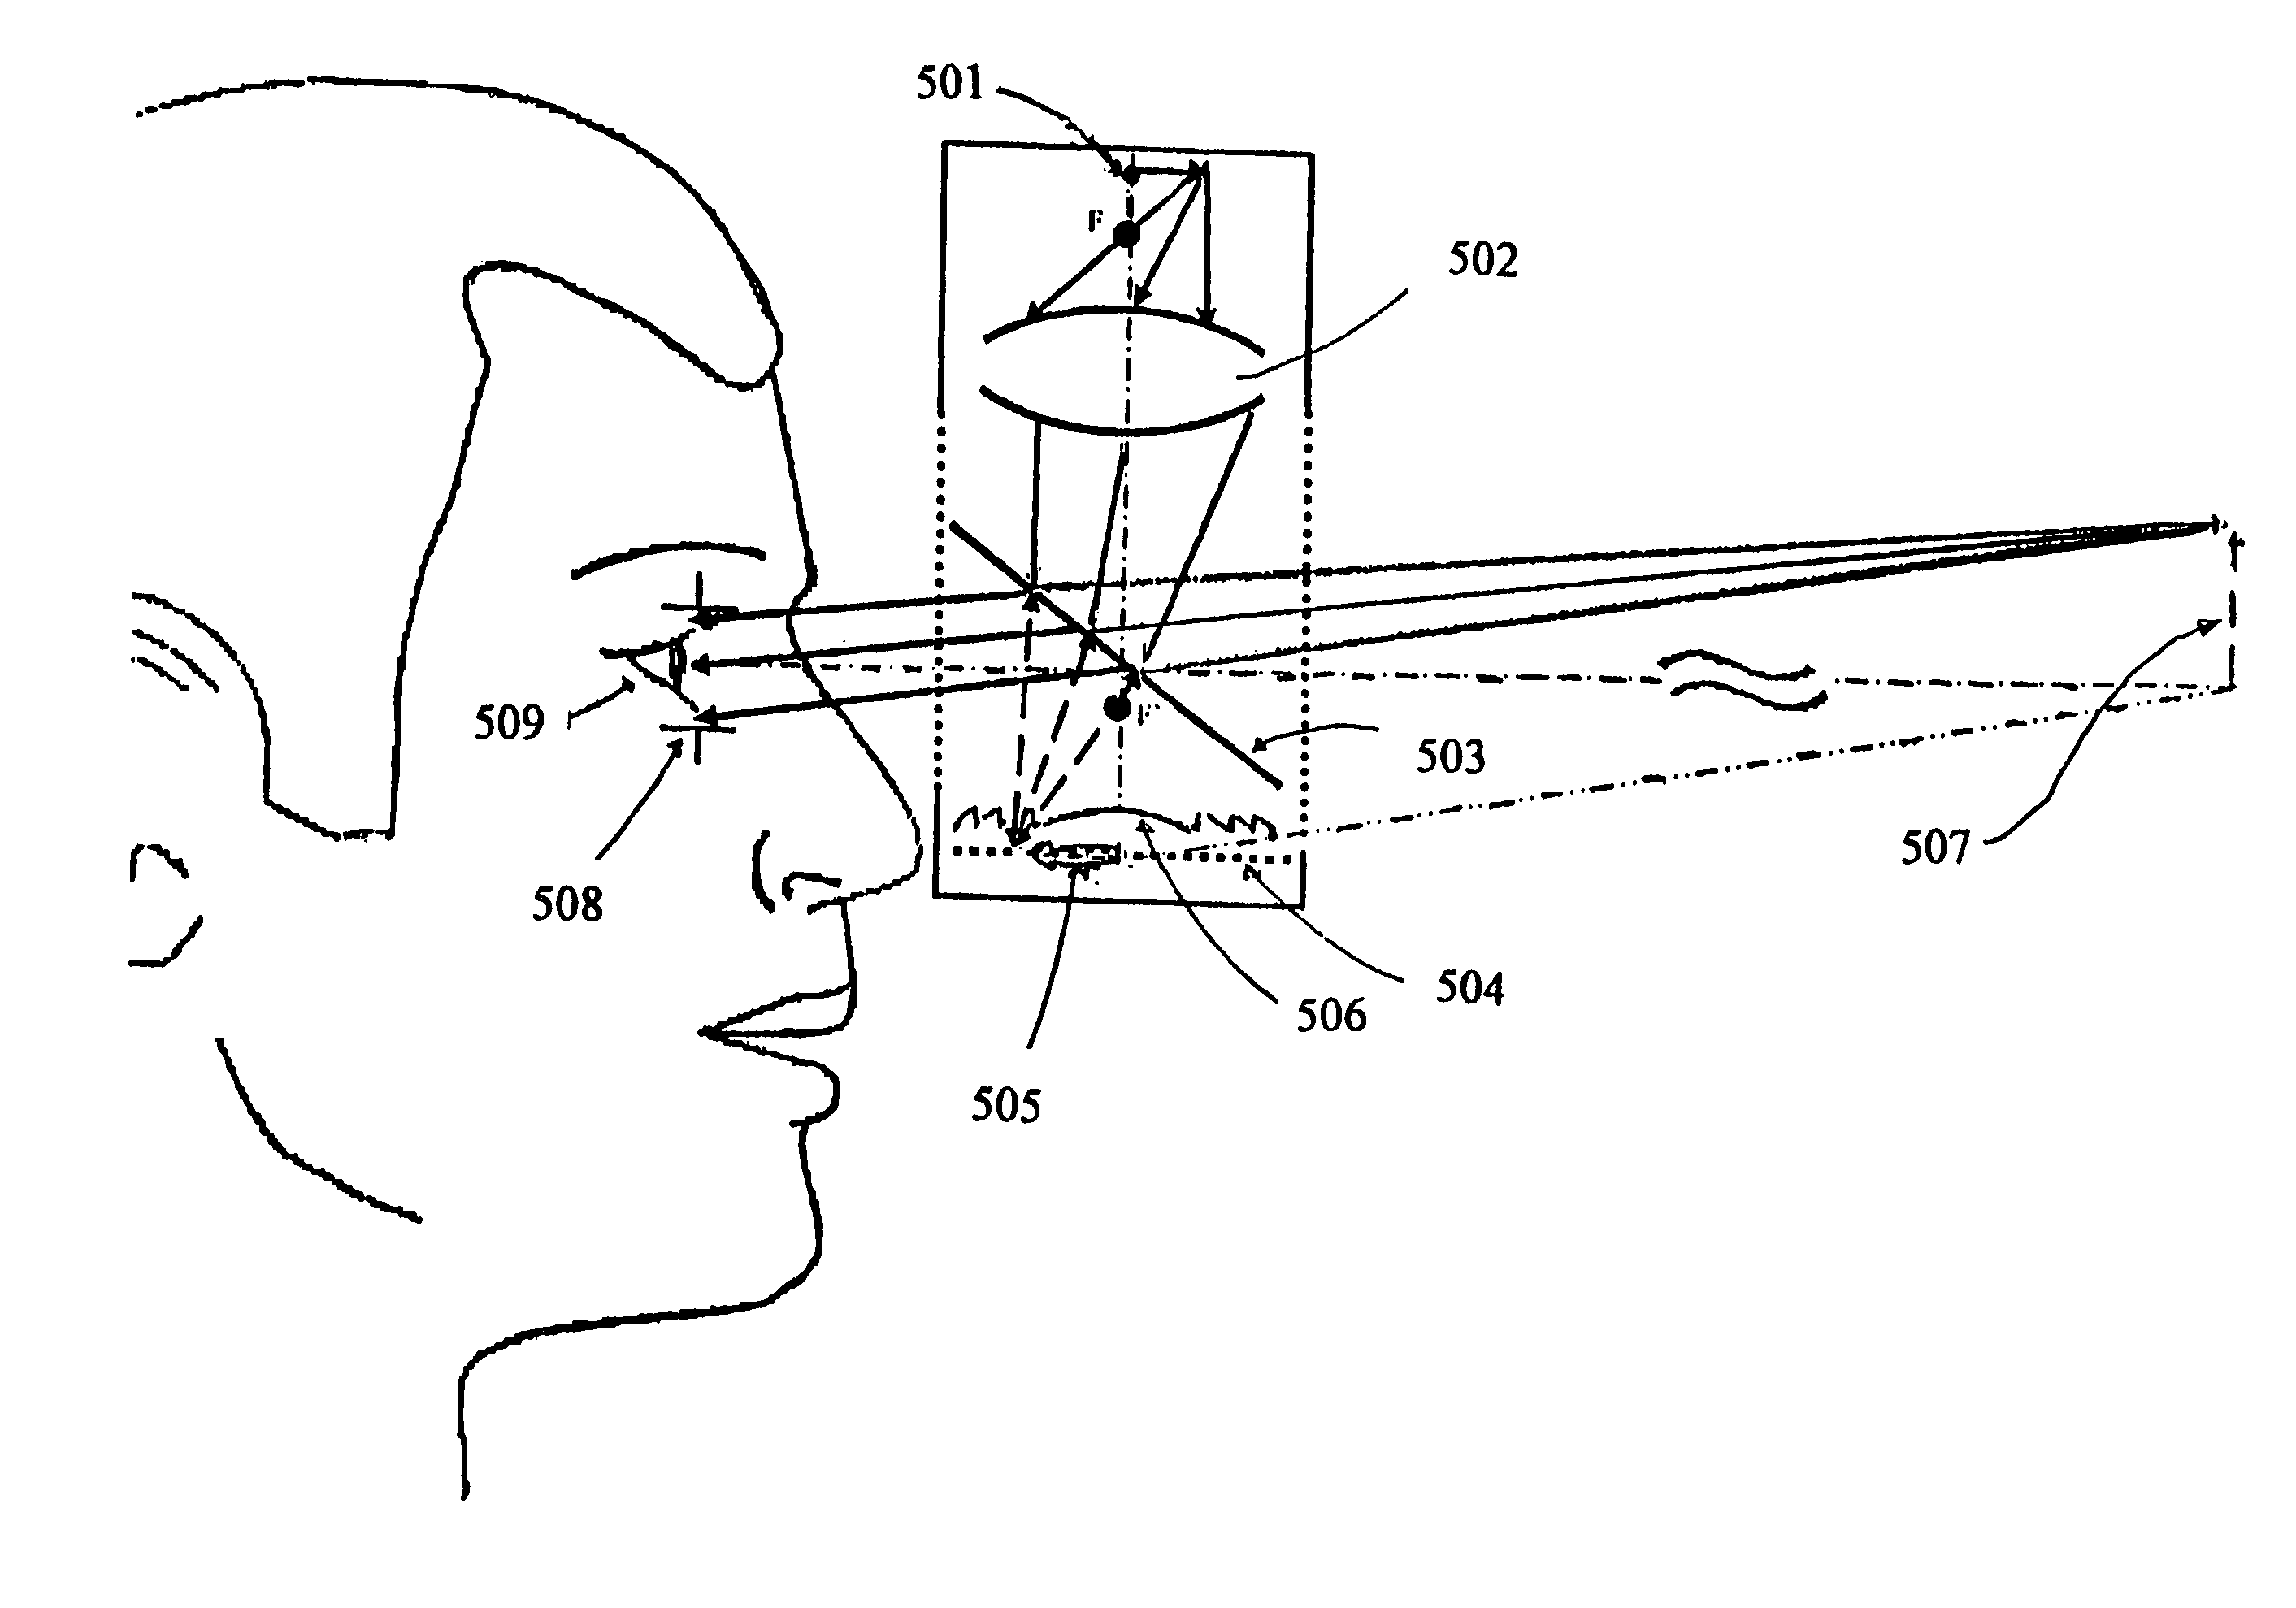 Head-mounted display by integration of phase-conjugate material